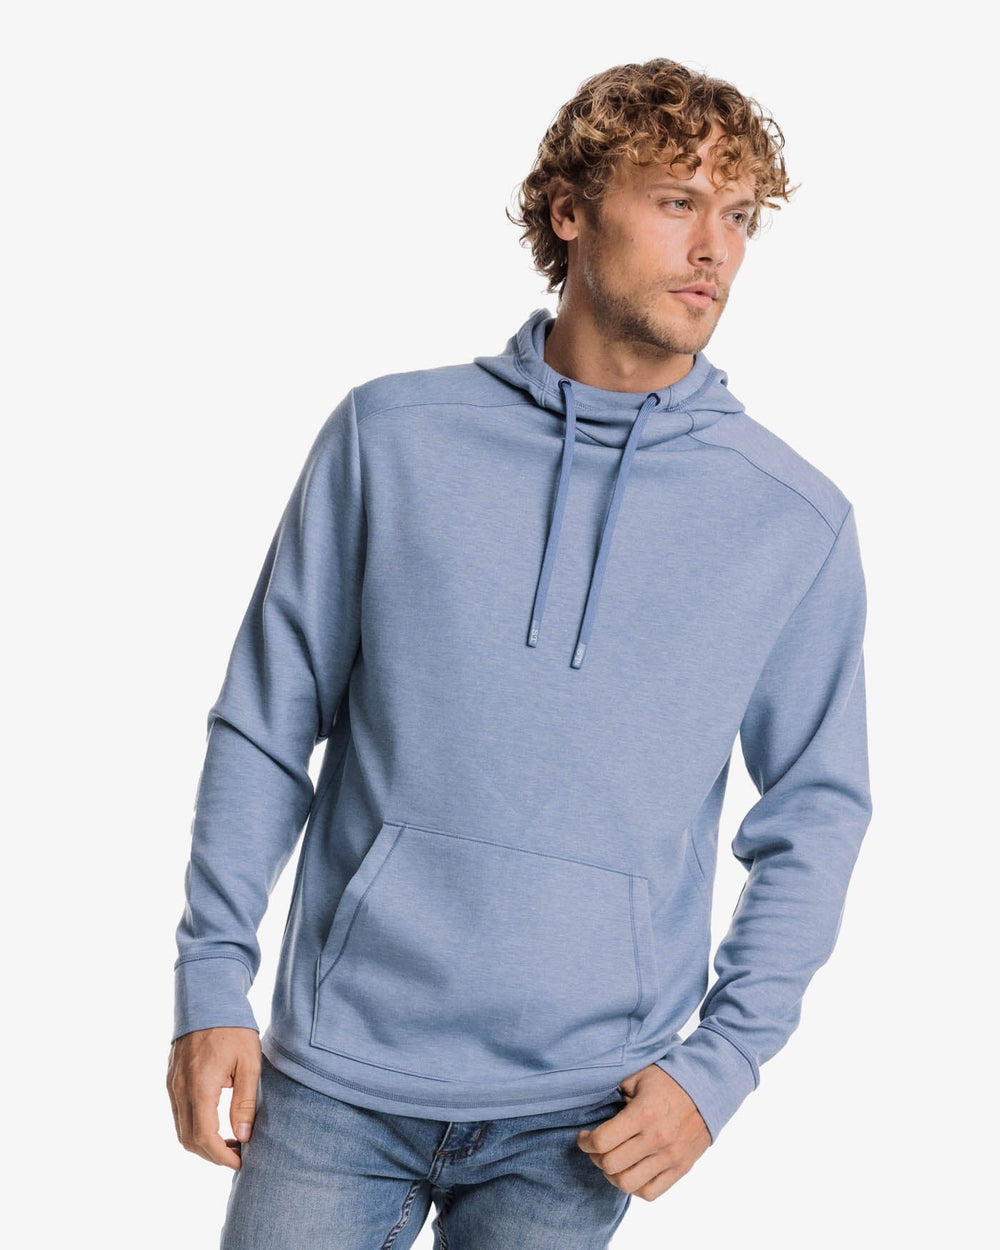 The front view of the Southern Tide Stratford Heather Interlock Hoodie by Southern Tide - Heather Blue Haze